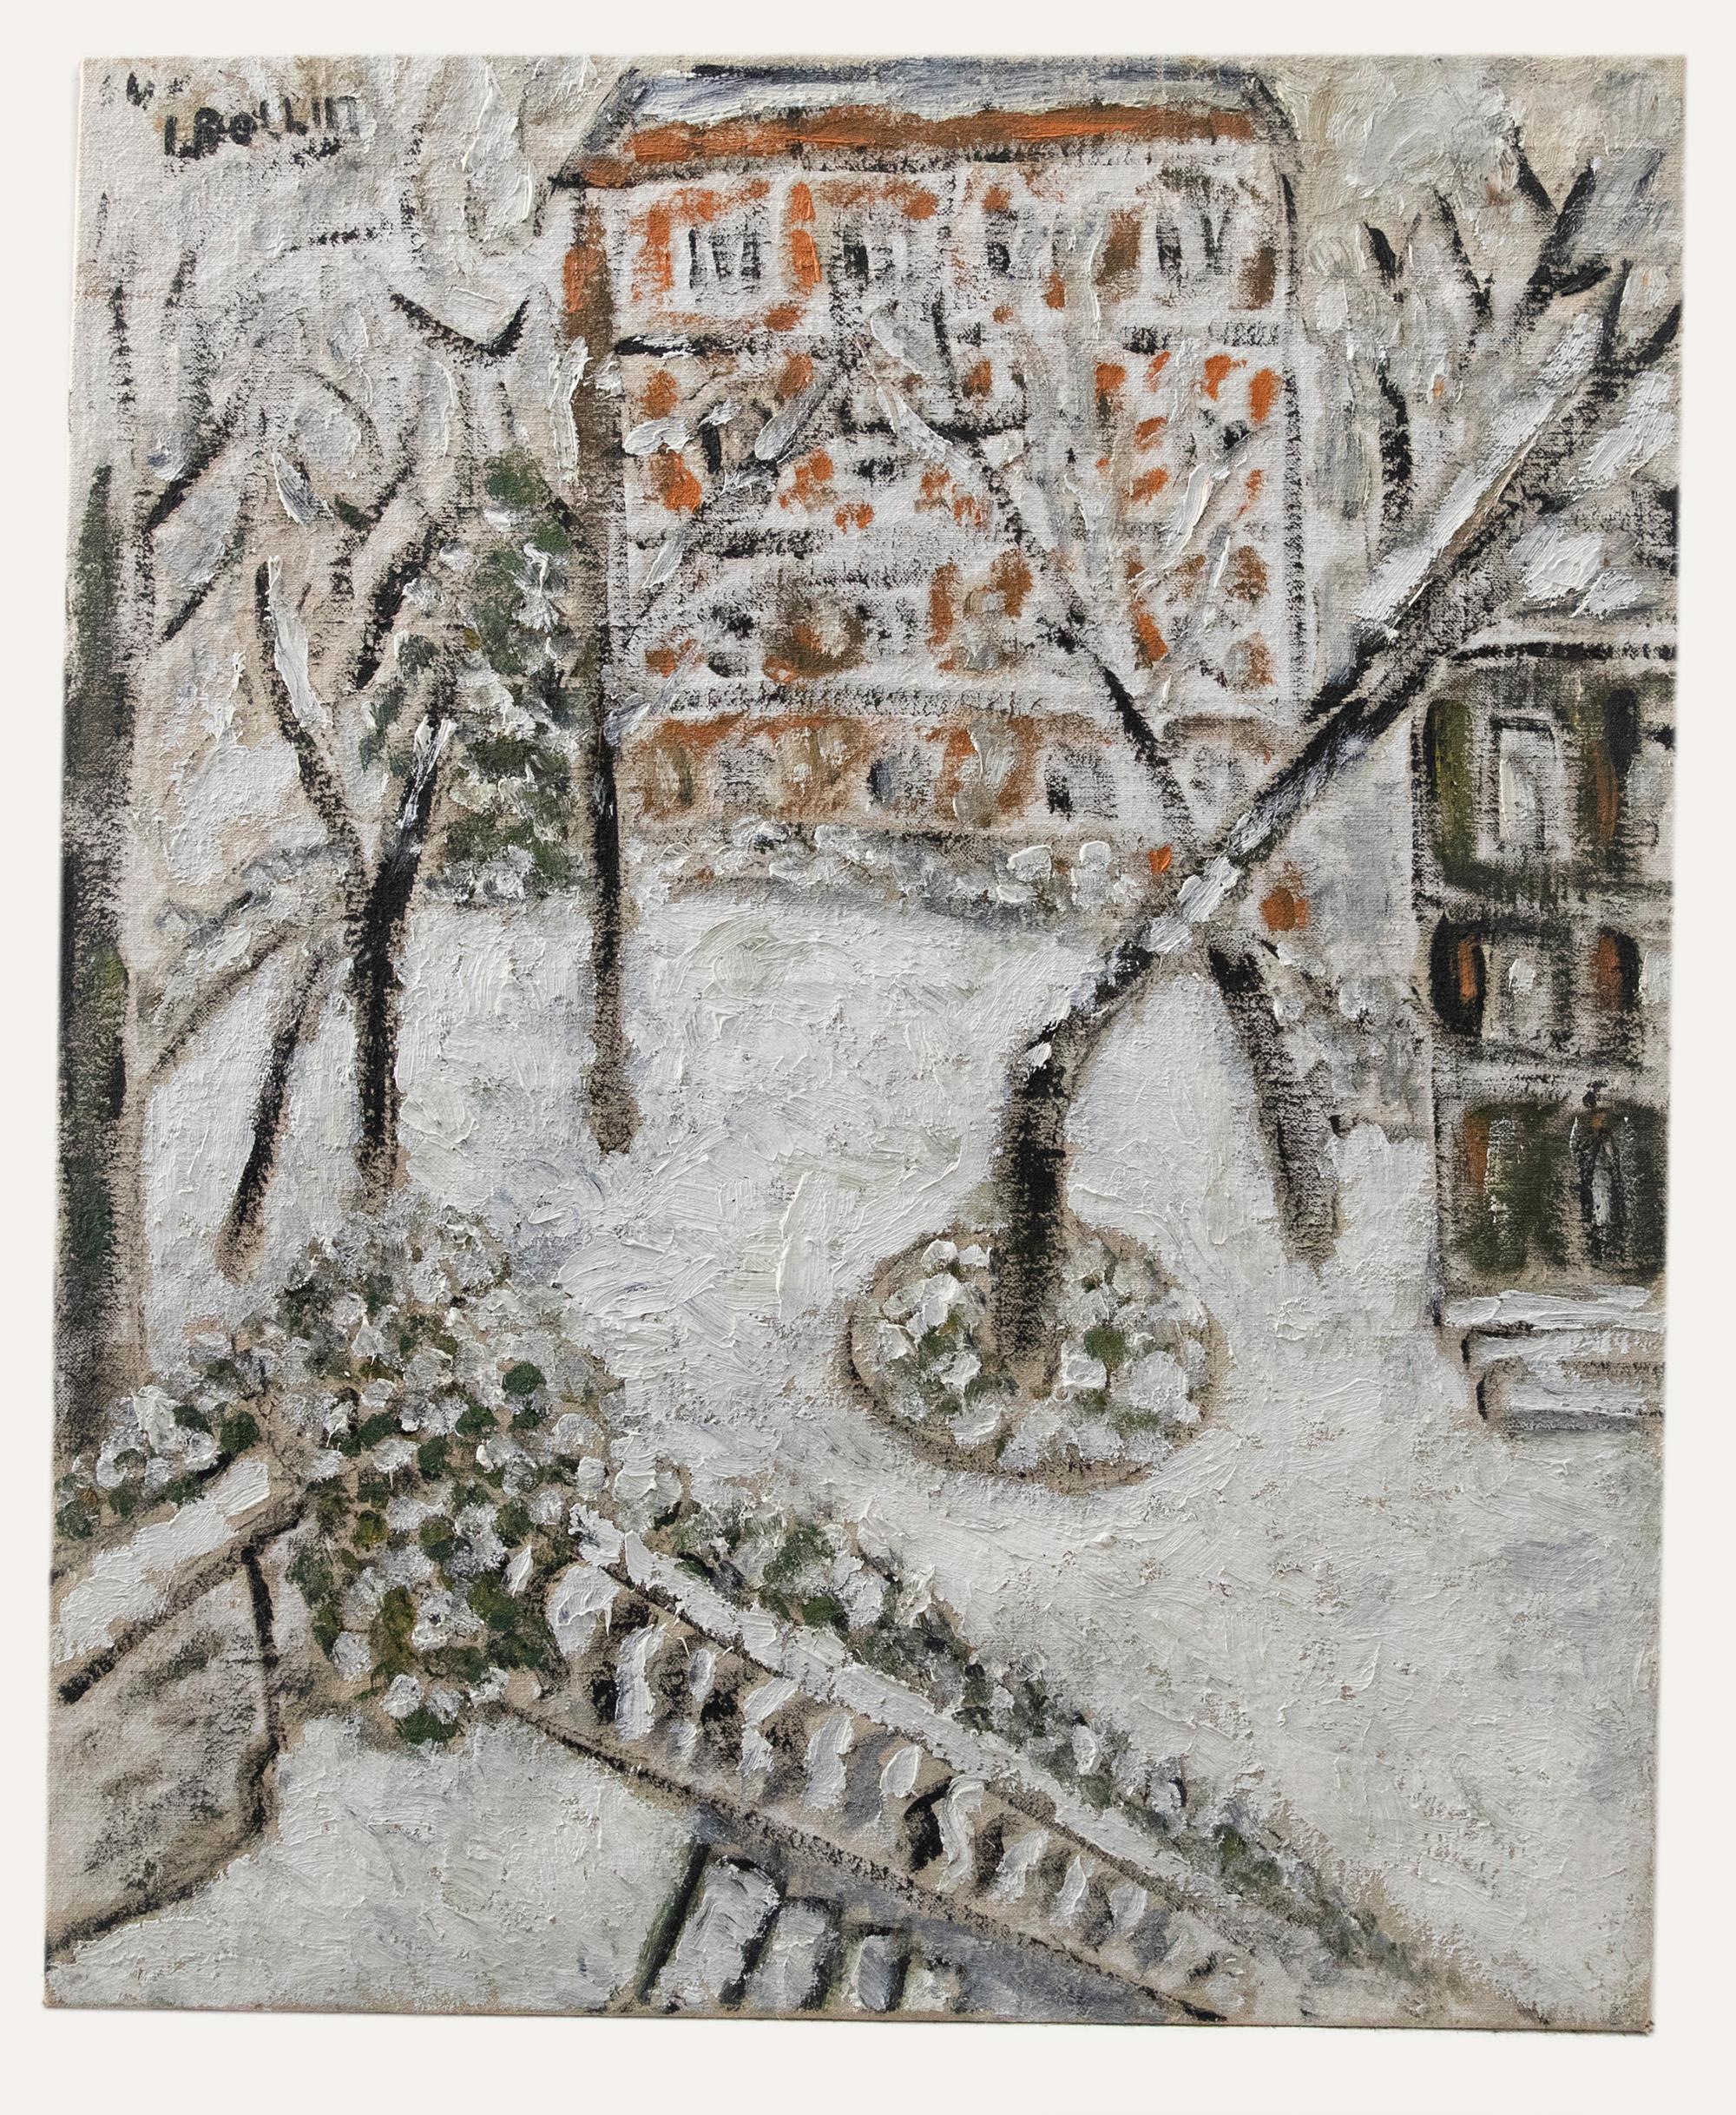 L. Bollin - Mid 20th Century Oil, The Square Under Snow - Painting by Unknown